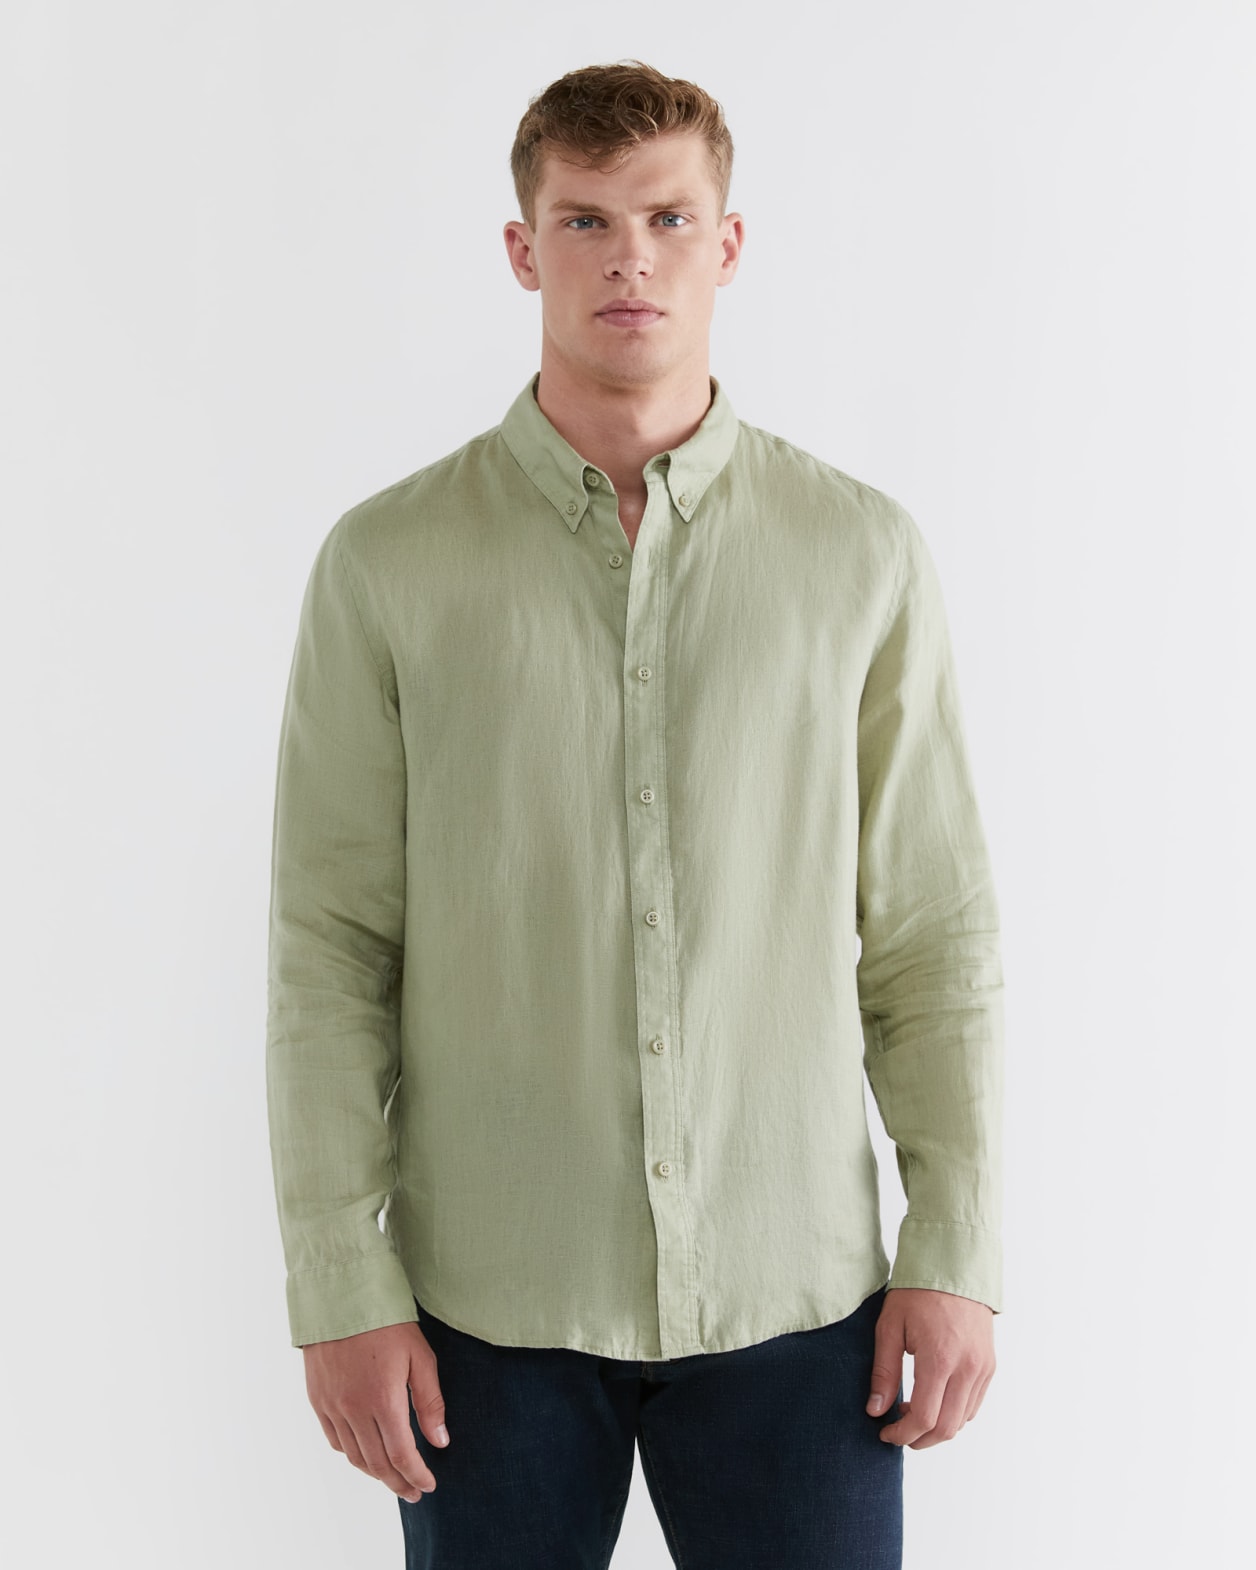 Hux Linen Shirt in OLIVE